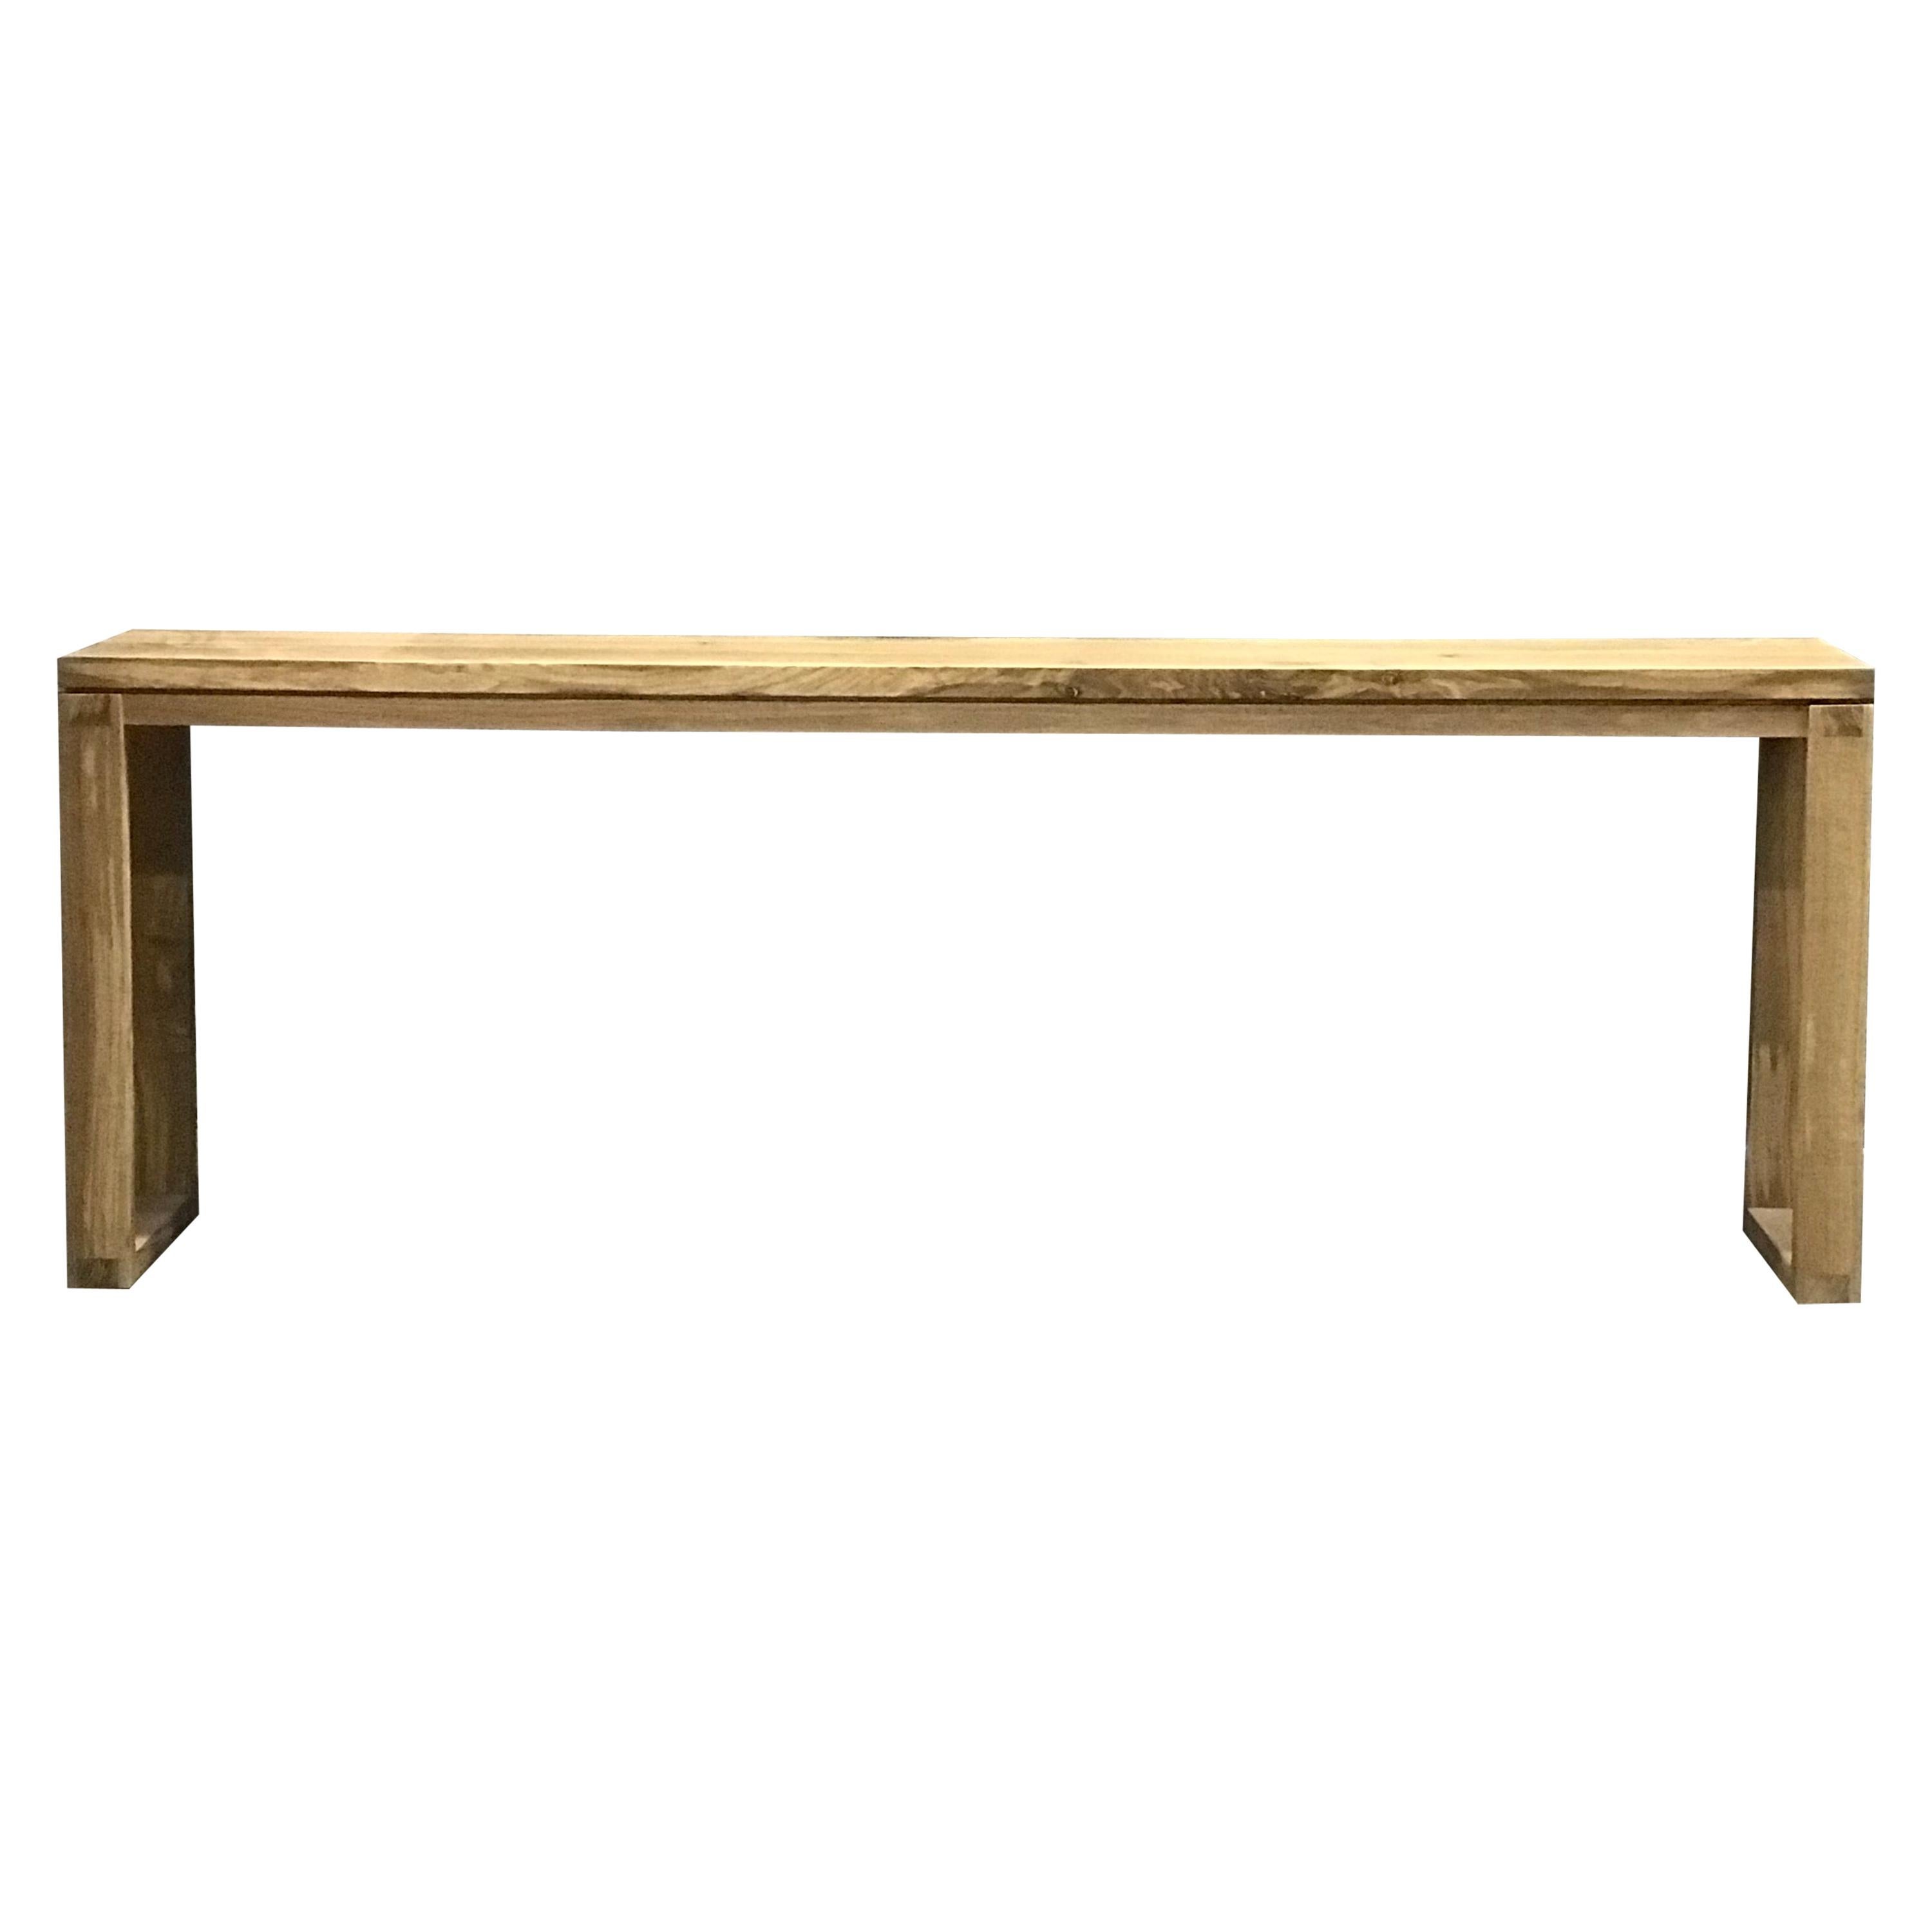 Rustic Long Narrow Modern White Oak Wood Console Table Parsons Style